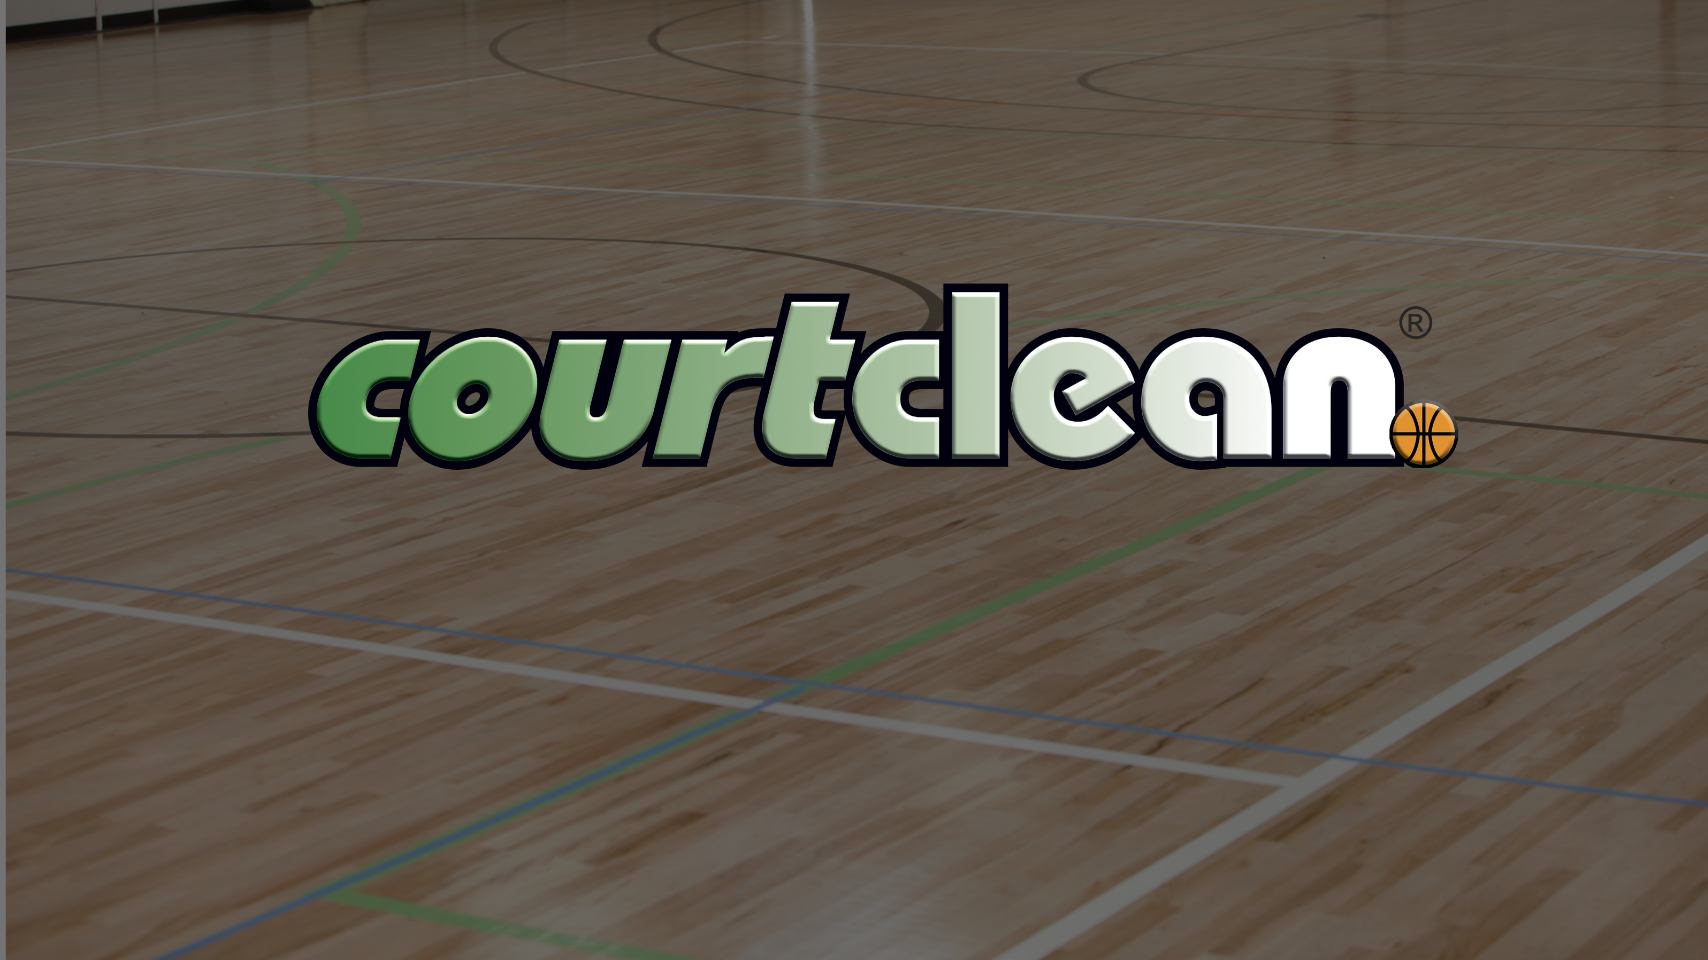 CourtClean Damp Mop System - Gopher Sport